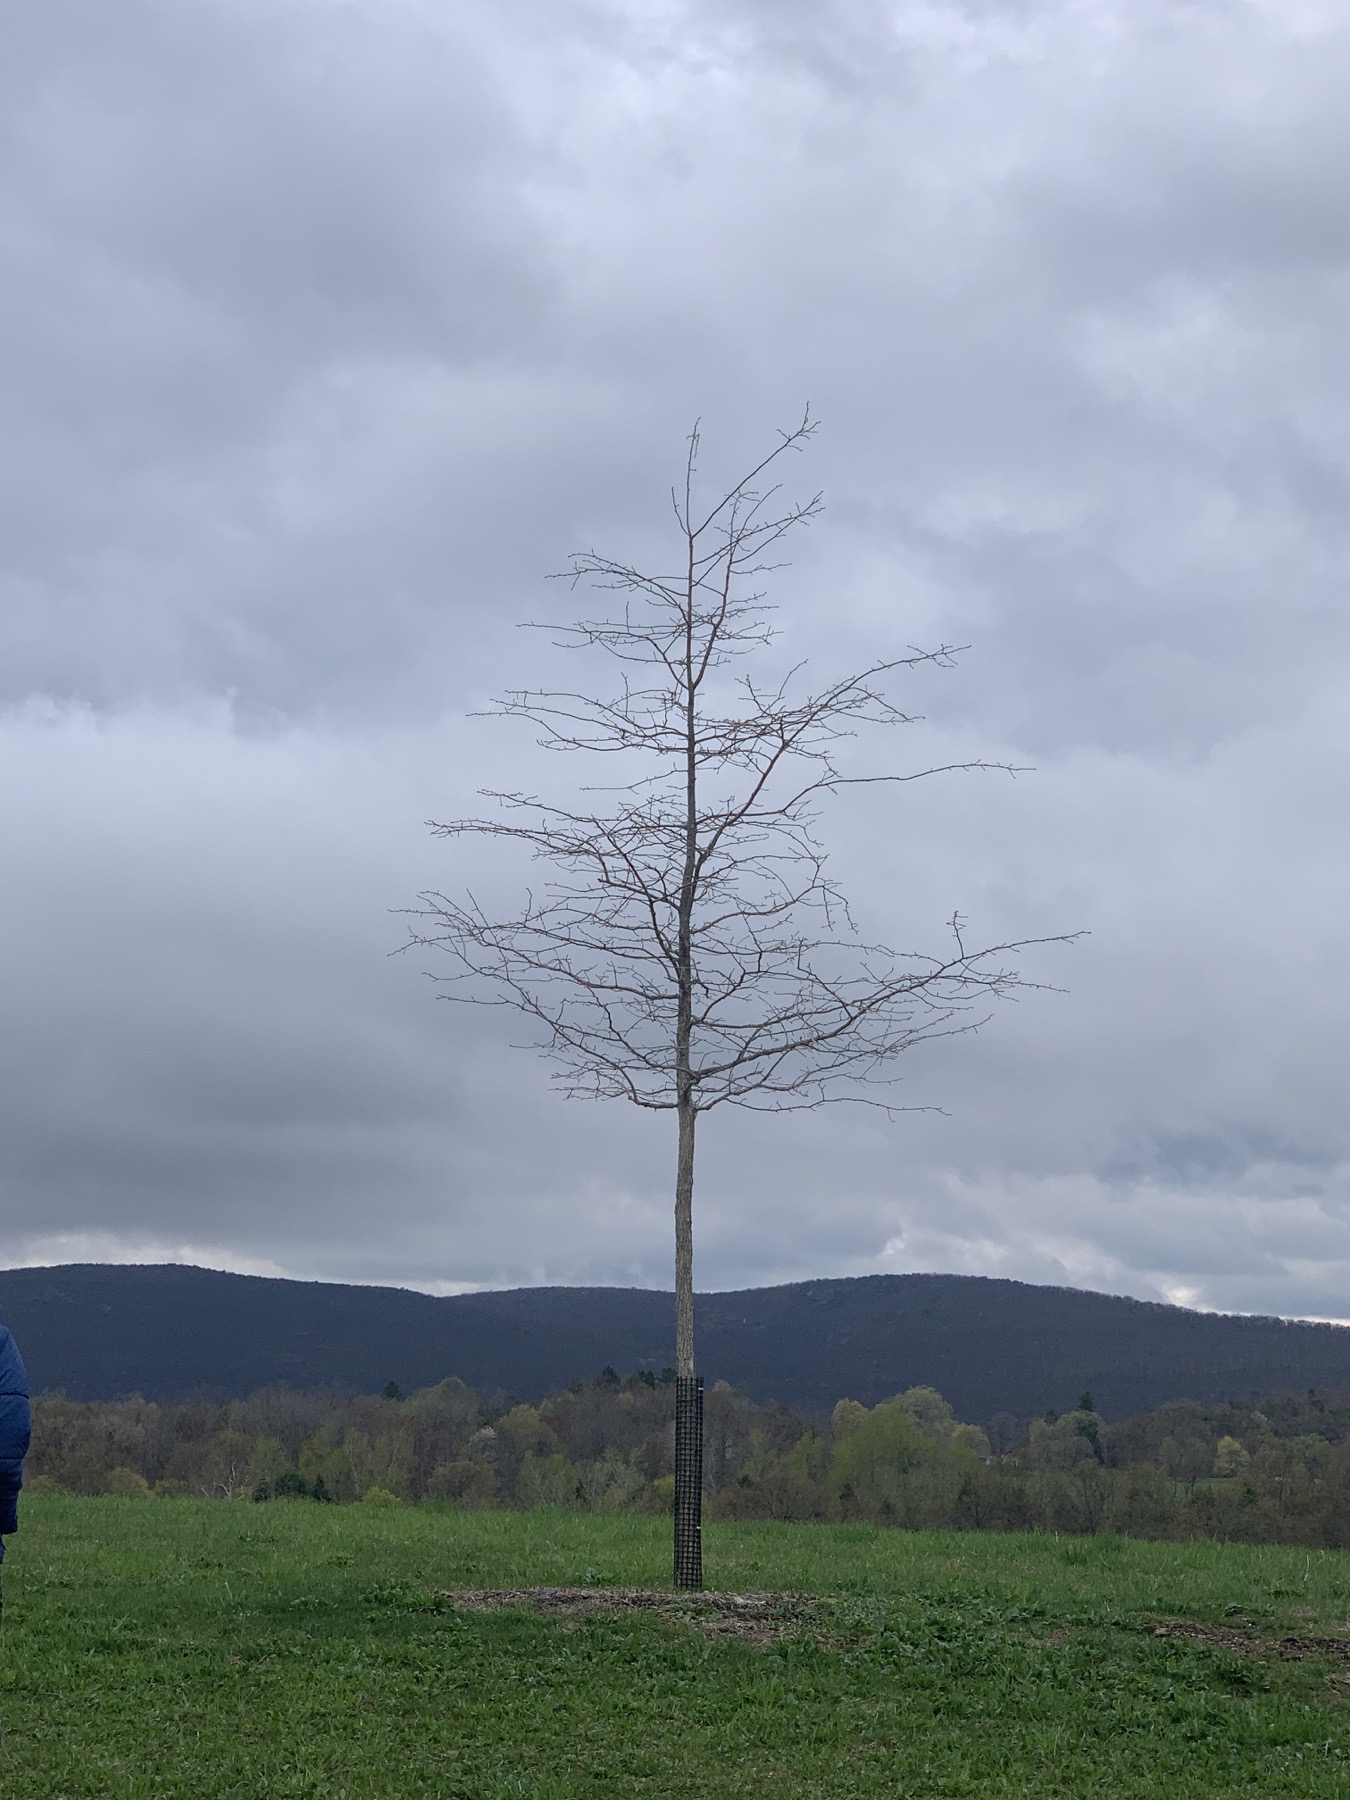 A photo of a tree with no leaves.